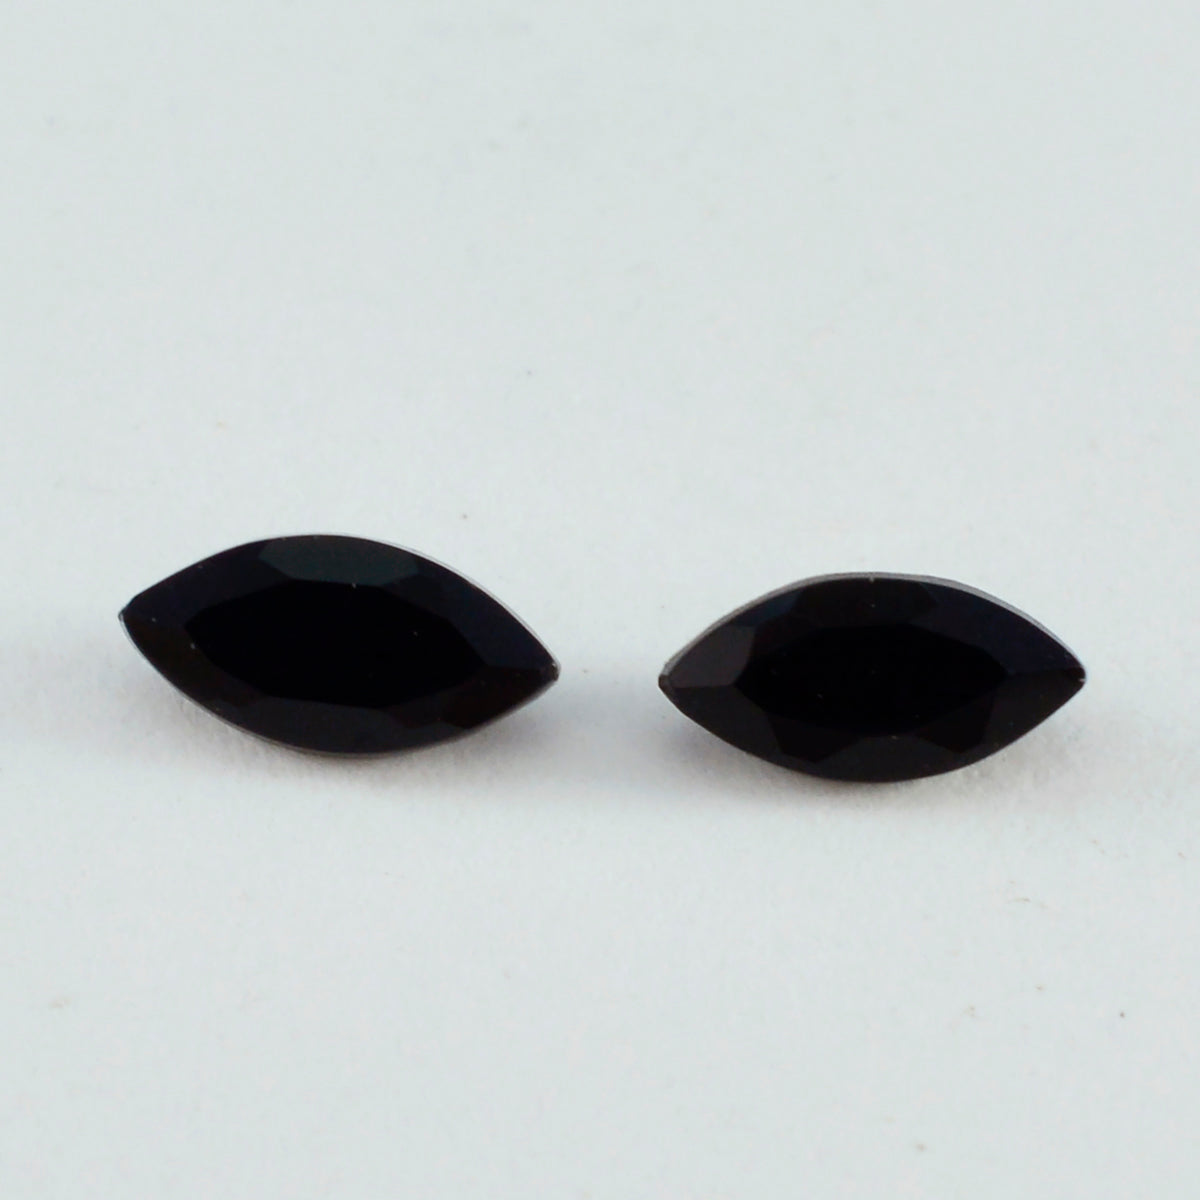 Riyogems 1PC Real Black Onyx Faceted 9x18 mm Marquise Shape excellent Quality Gem